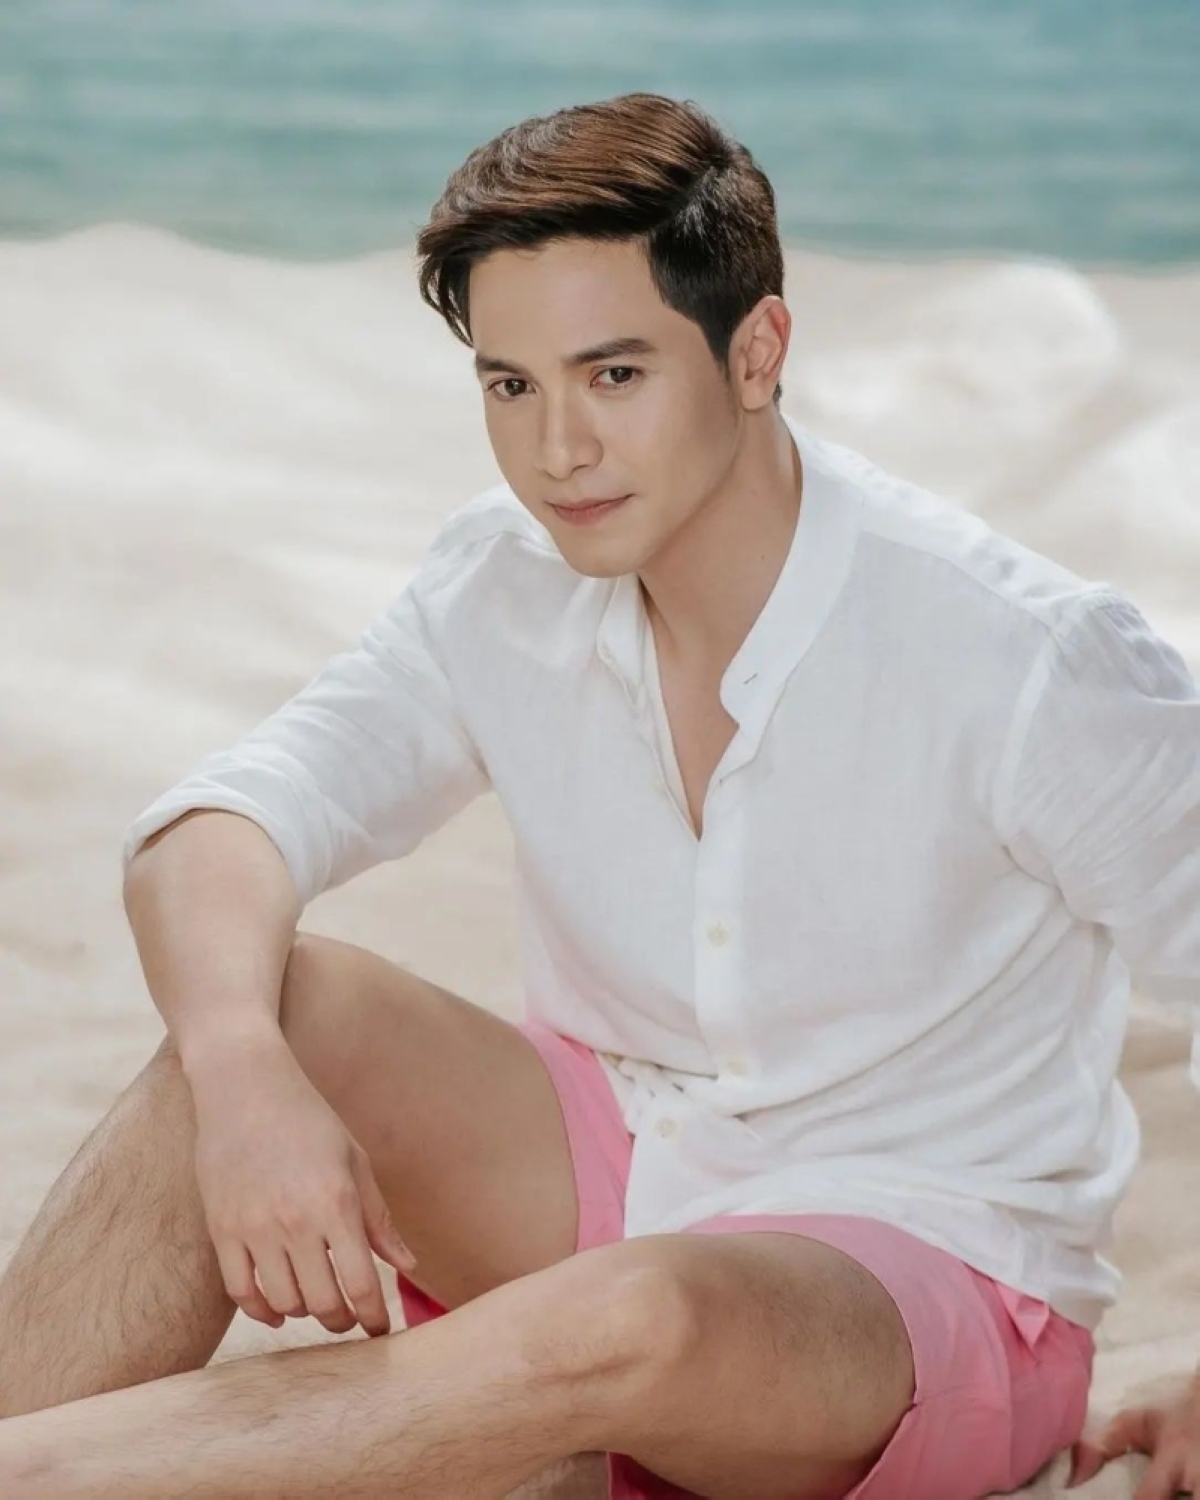 Alden Richards knows that taking care of one’s skin is important.